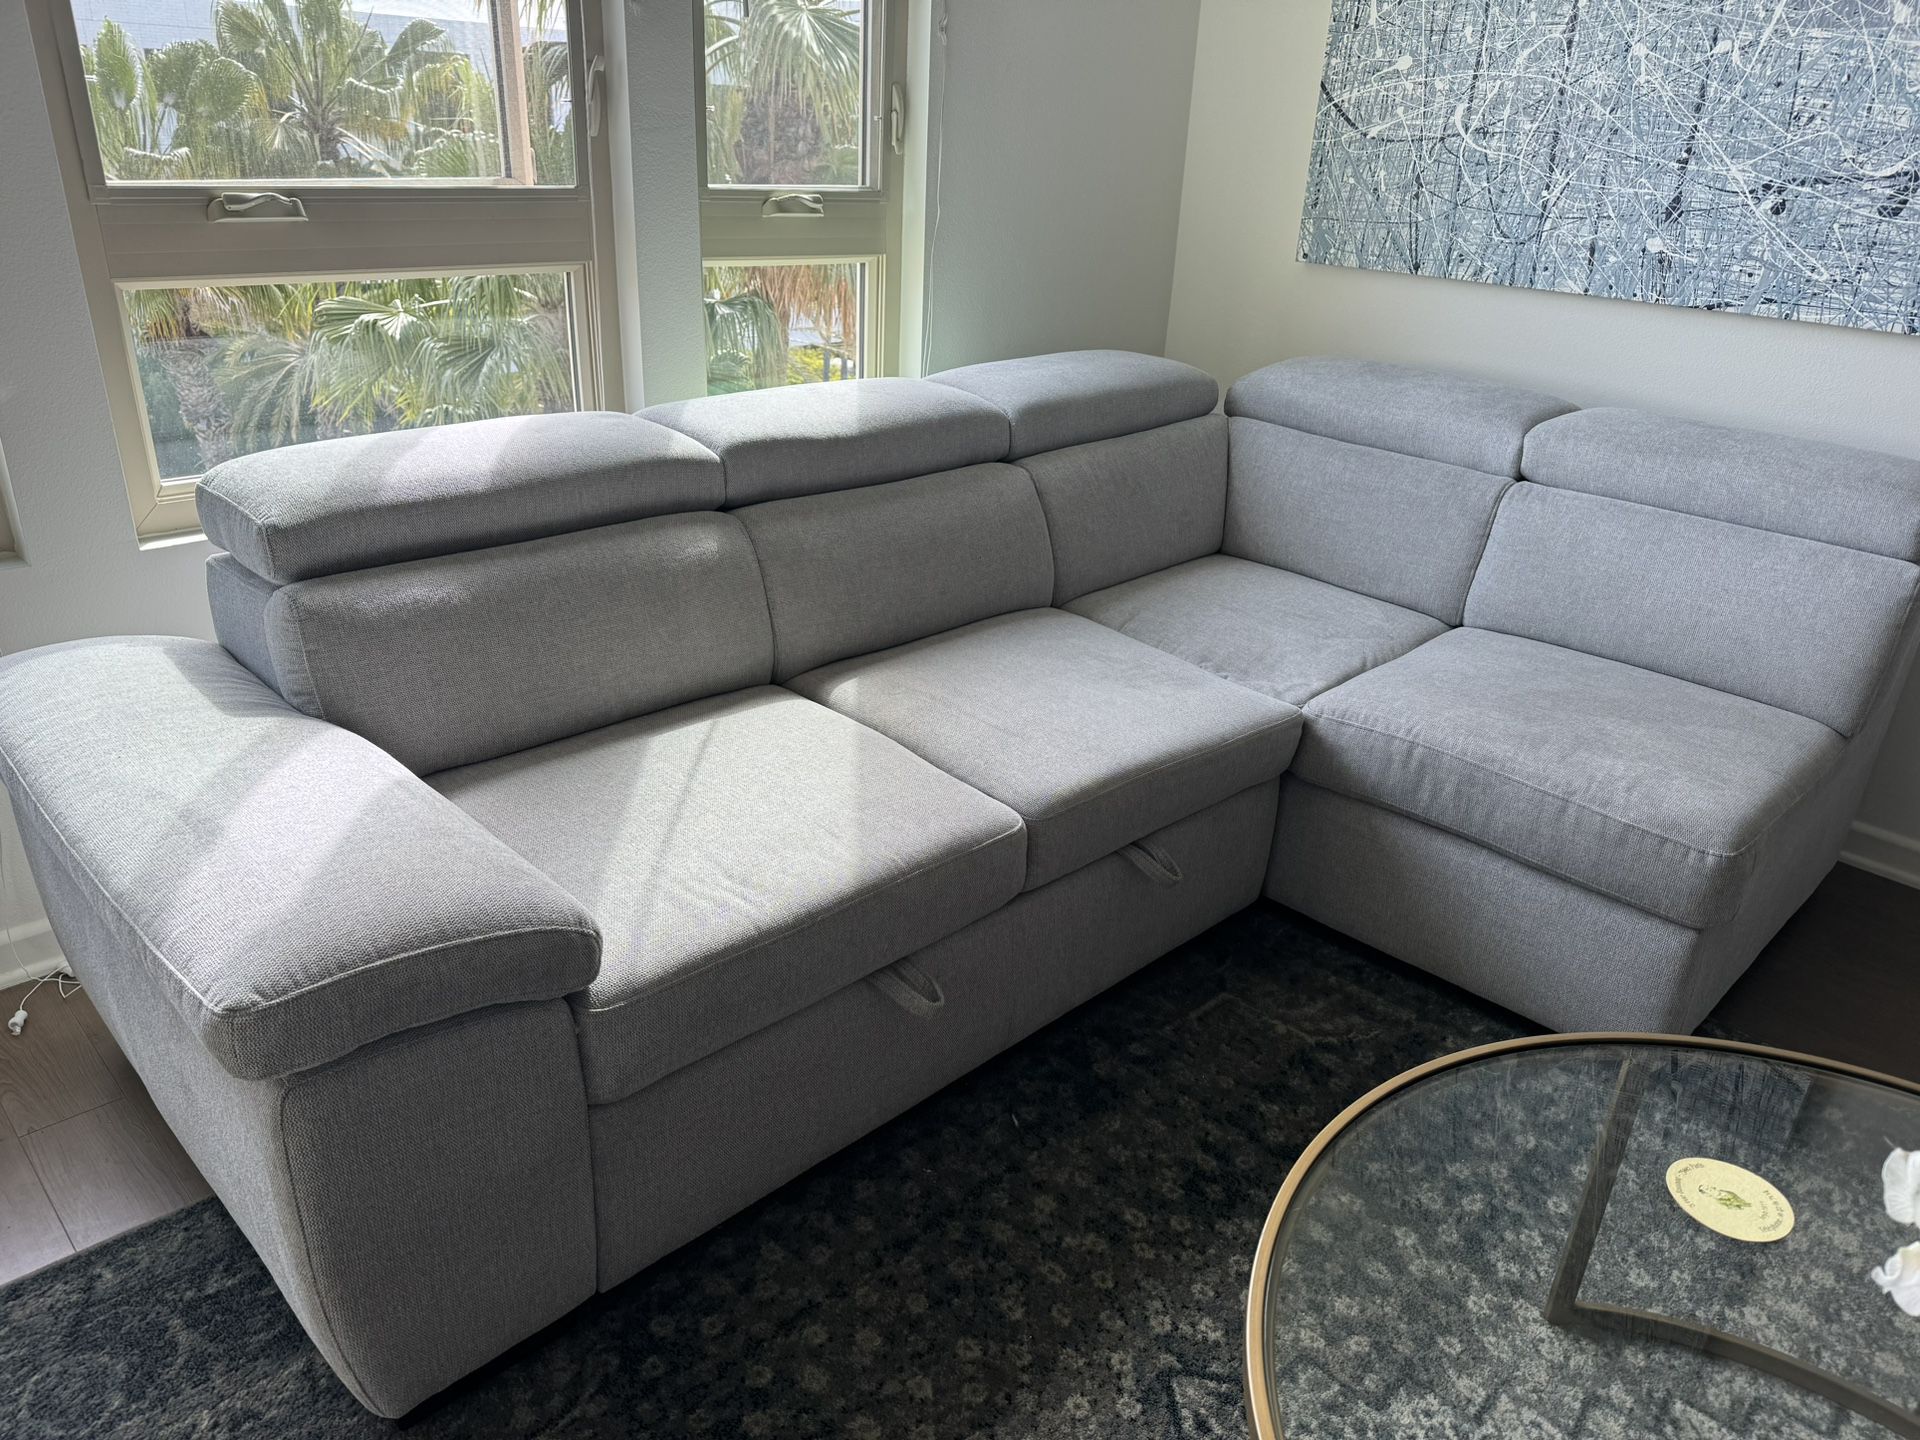 Free Brand New Sectional